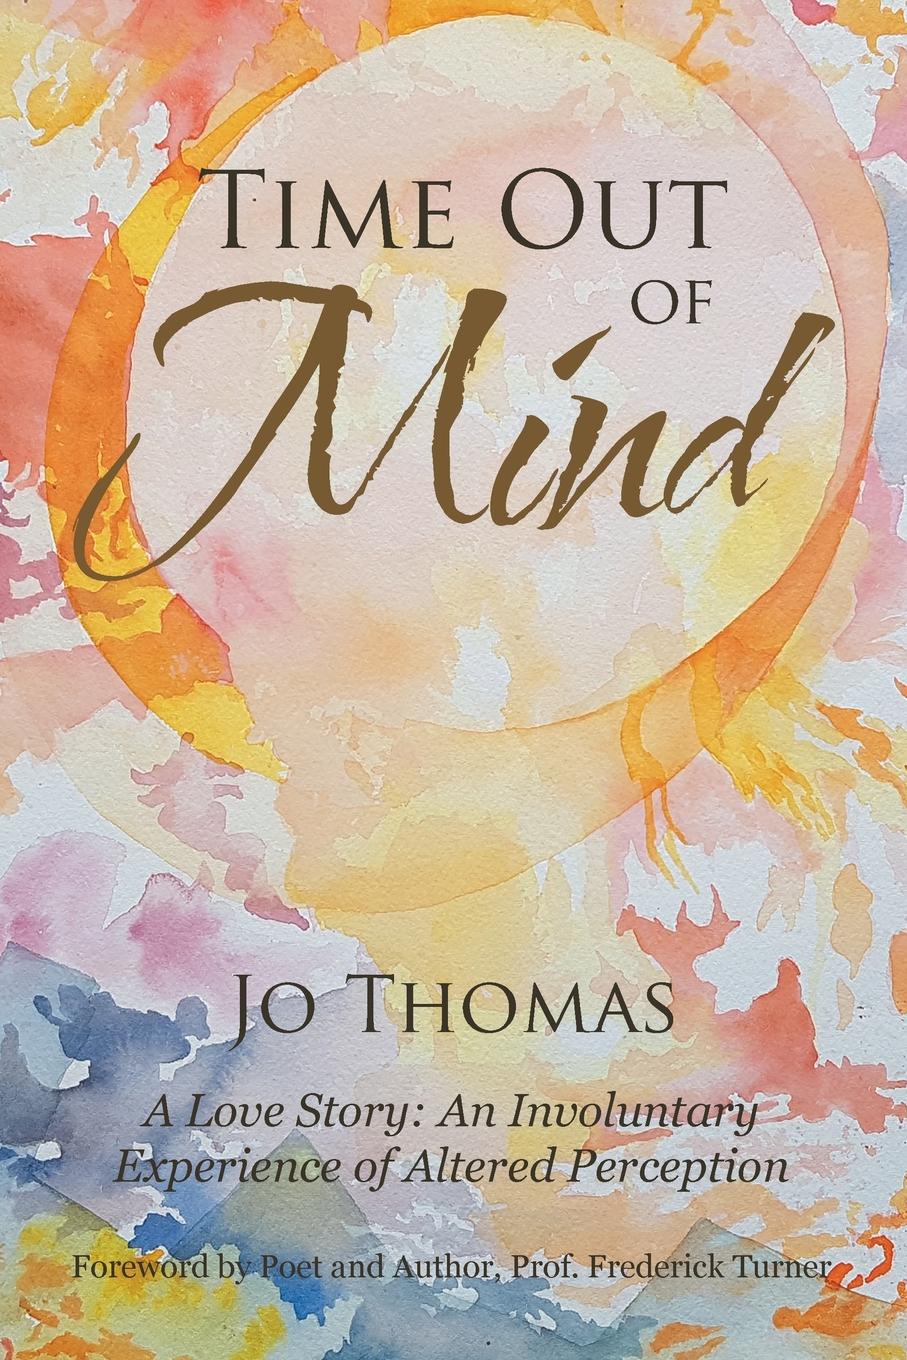 Time Out of Mind. A Love Story: An Involuntary Experience of Altered Perception